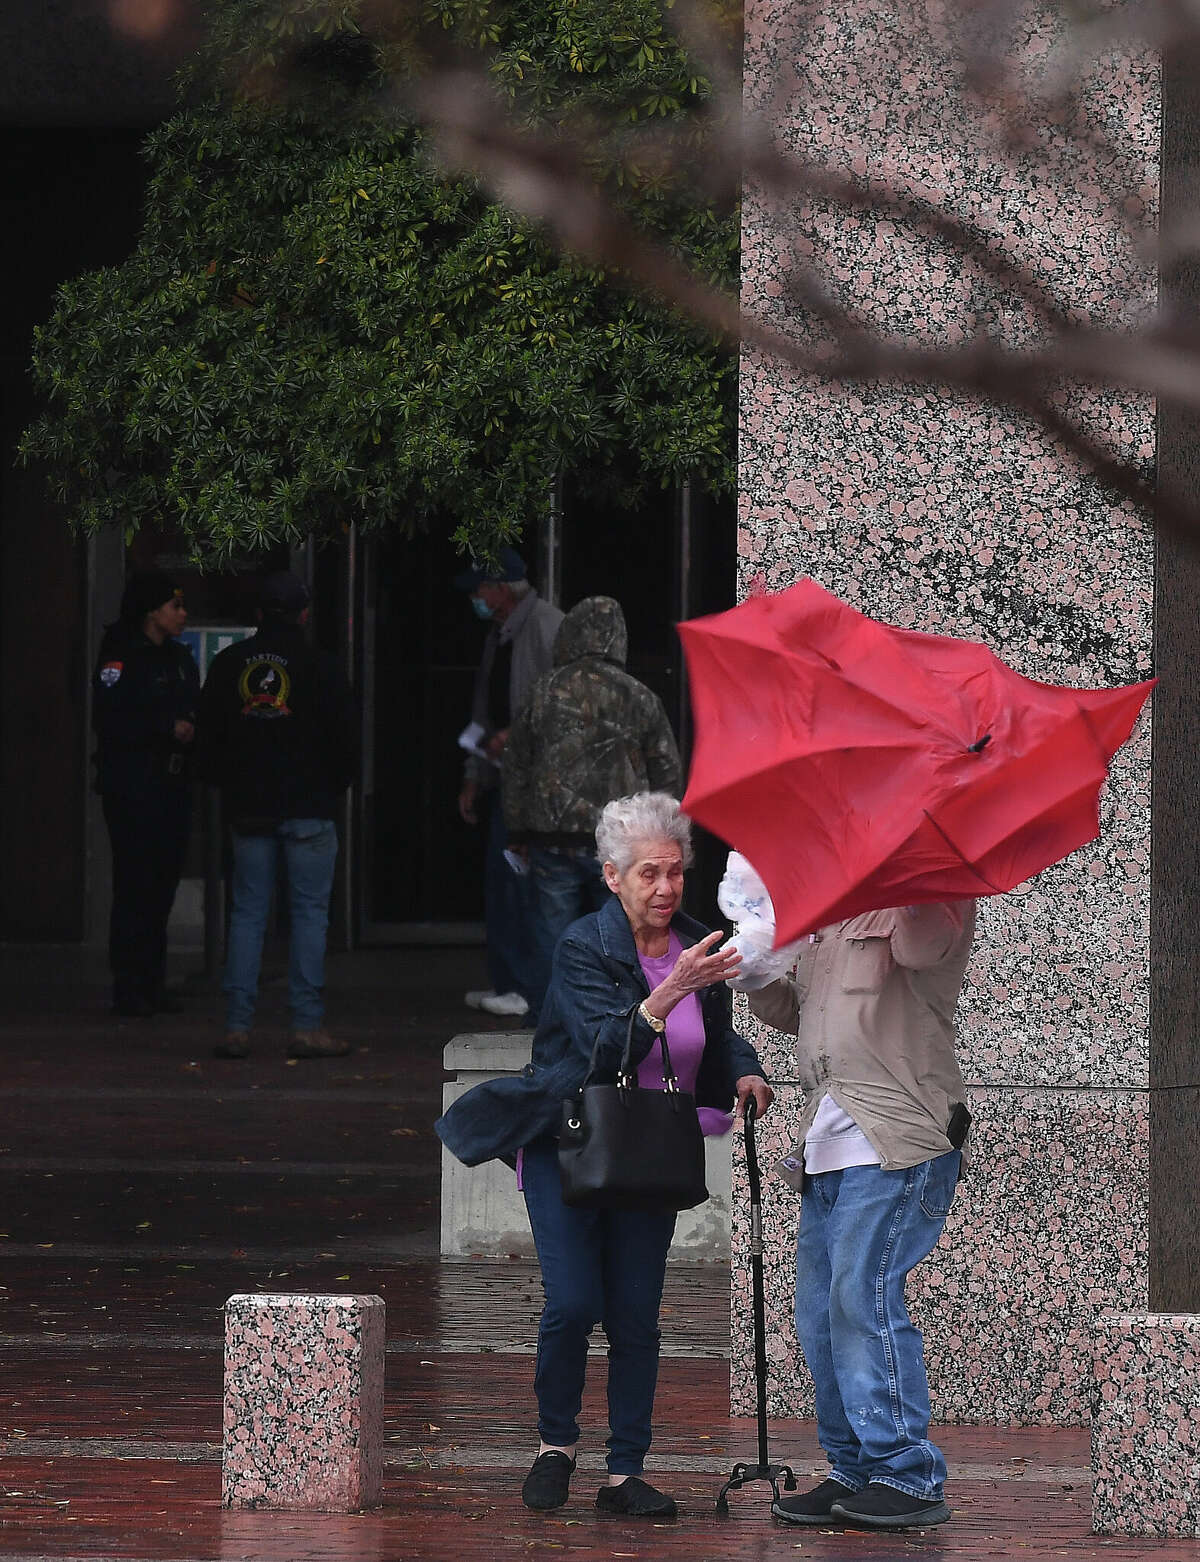 A man helps an elderly woman with her umbrella amid gusting winds outside the Jefferson County Courthouse as heavy storms with high winds moved through the region Tuesday afternoon. Photo made Tuesday, January 24, 2023 Kim Brent/Beaumont Enterprise